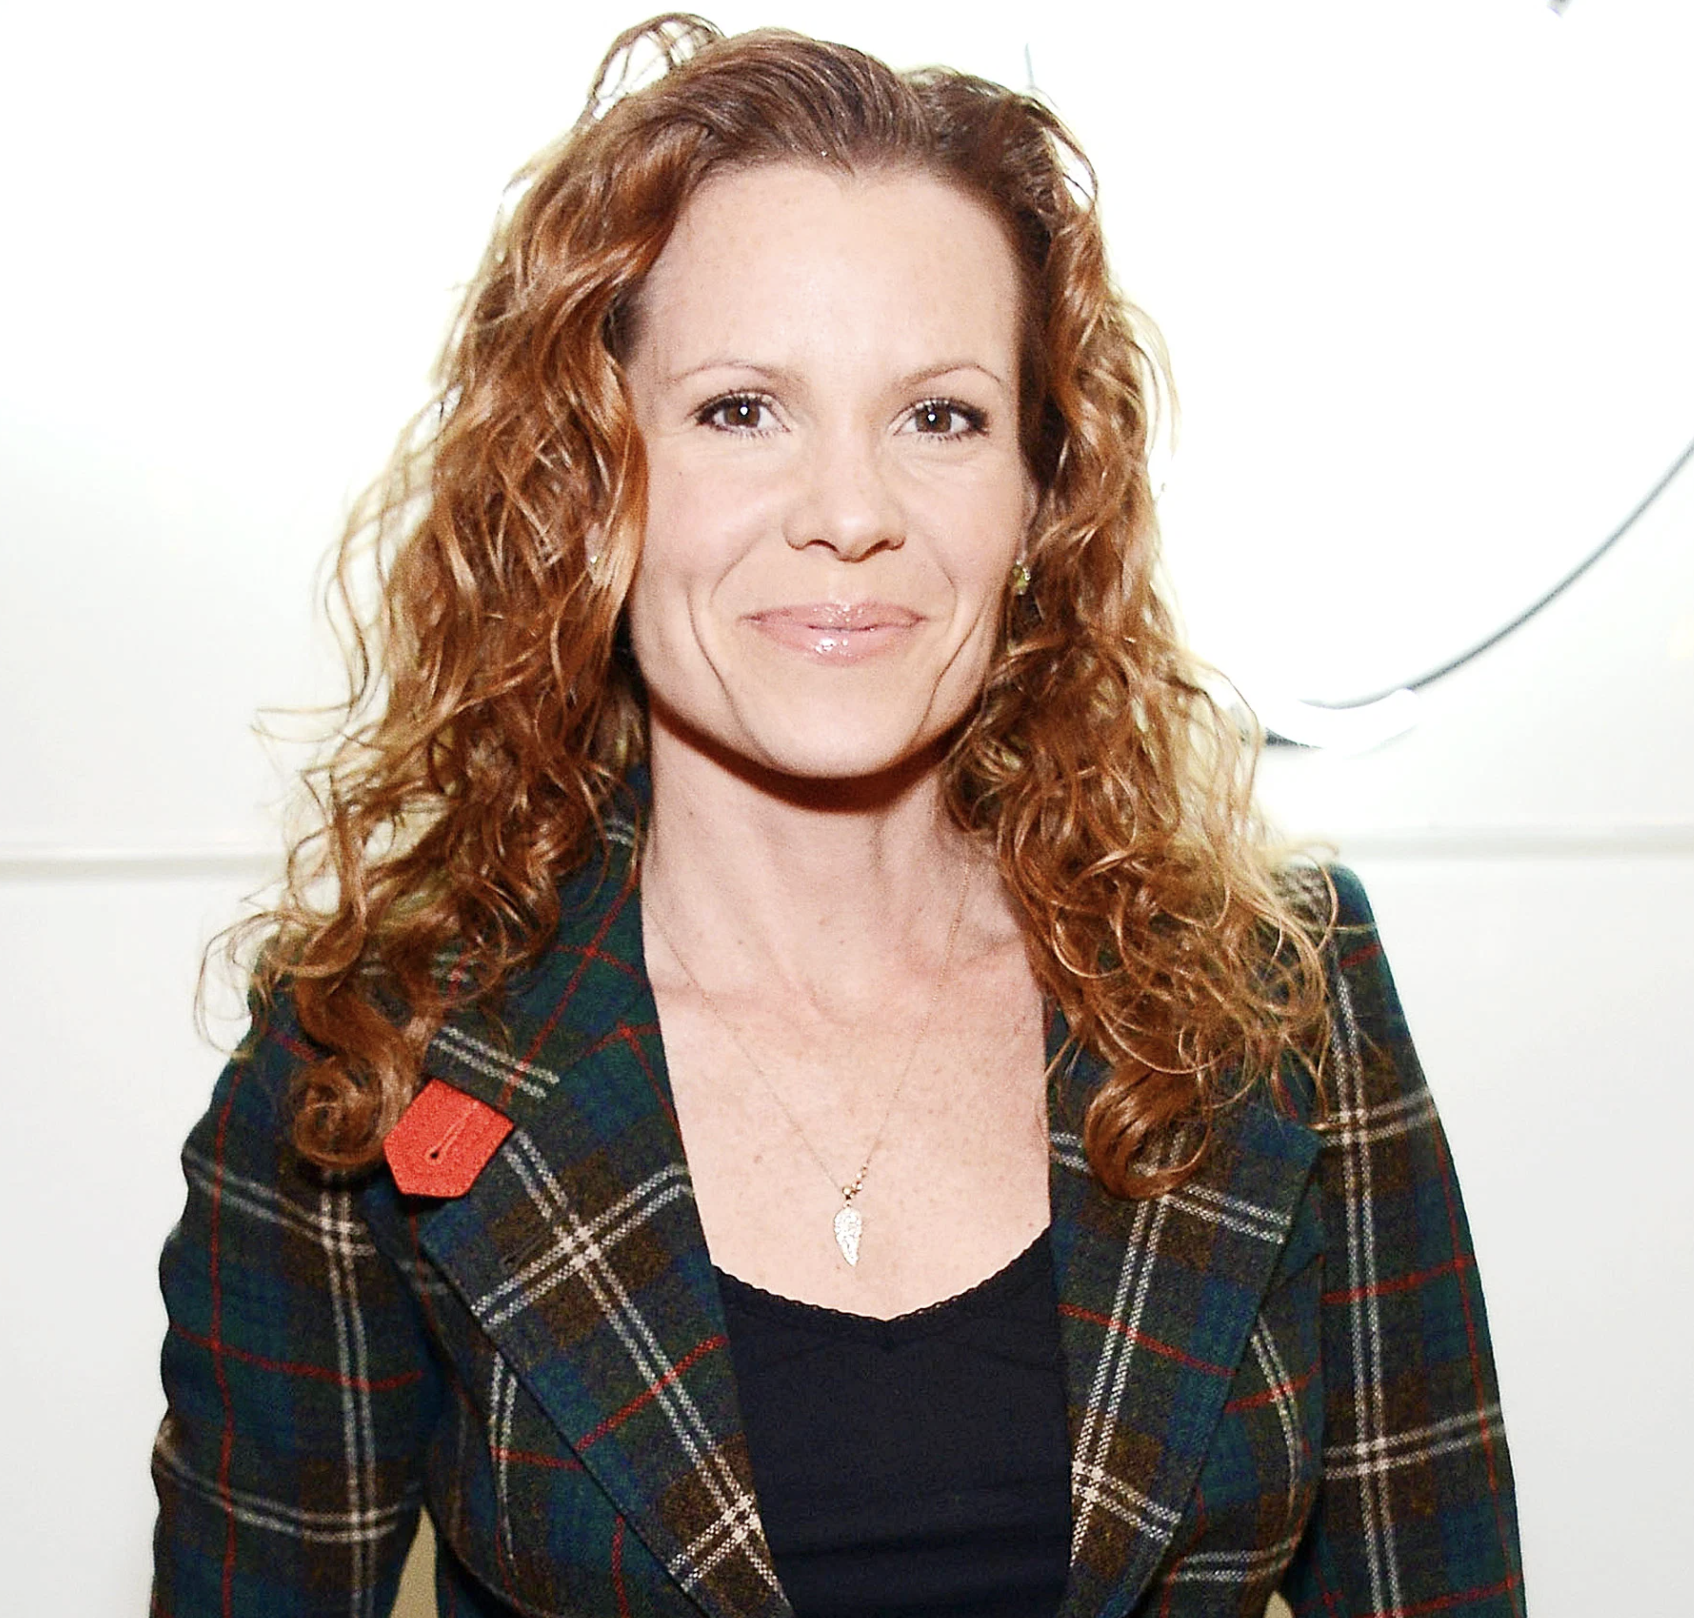 Robyn lively nude pics